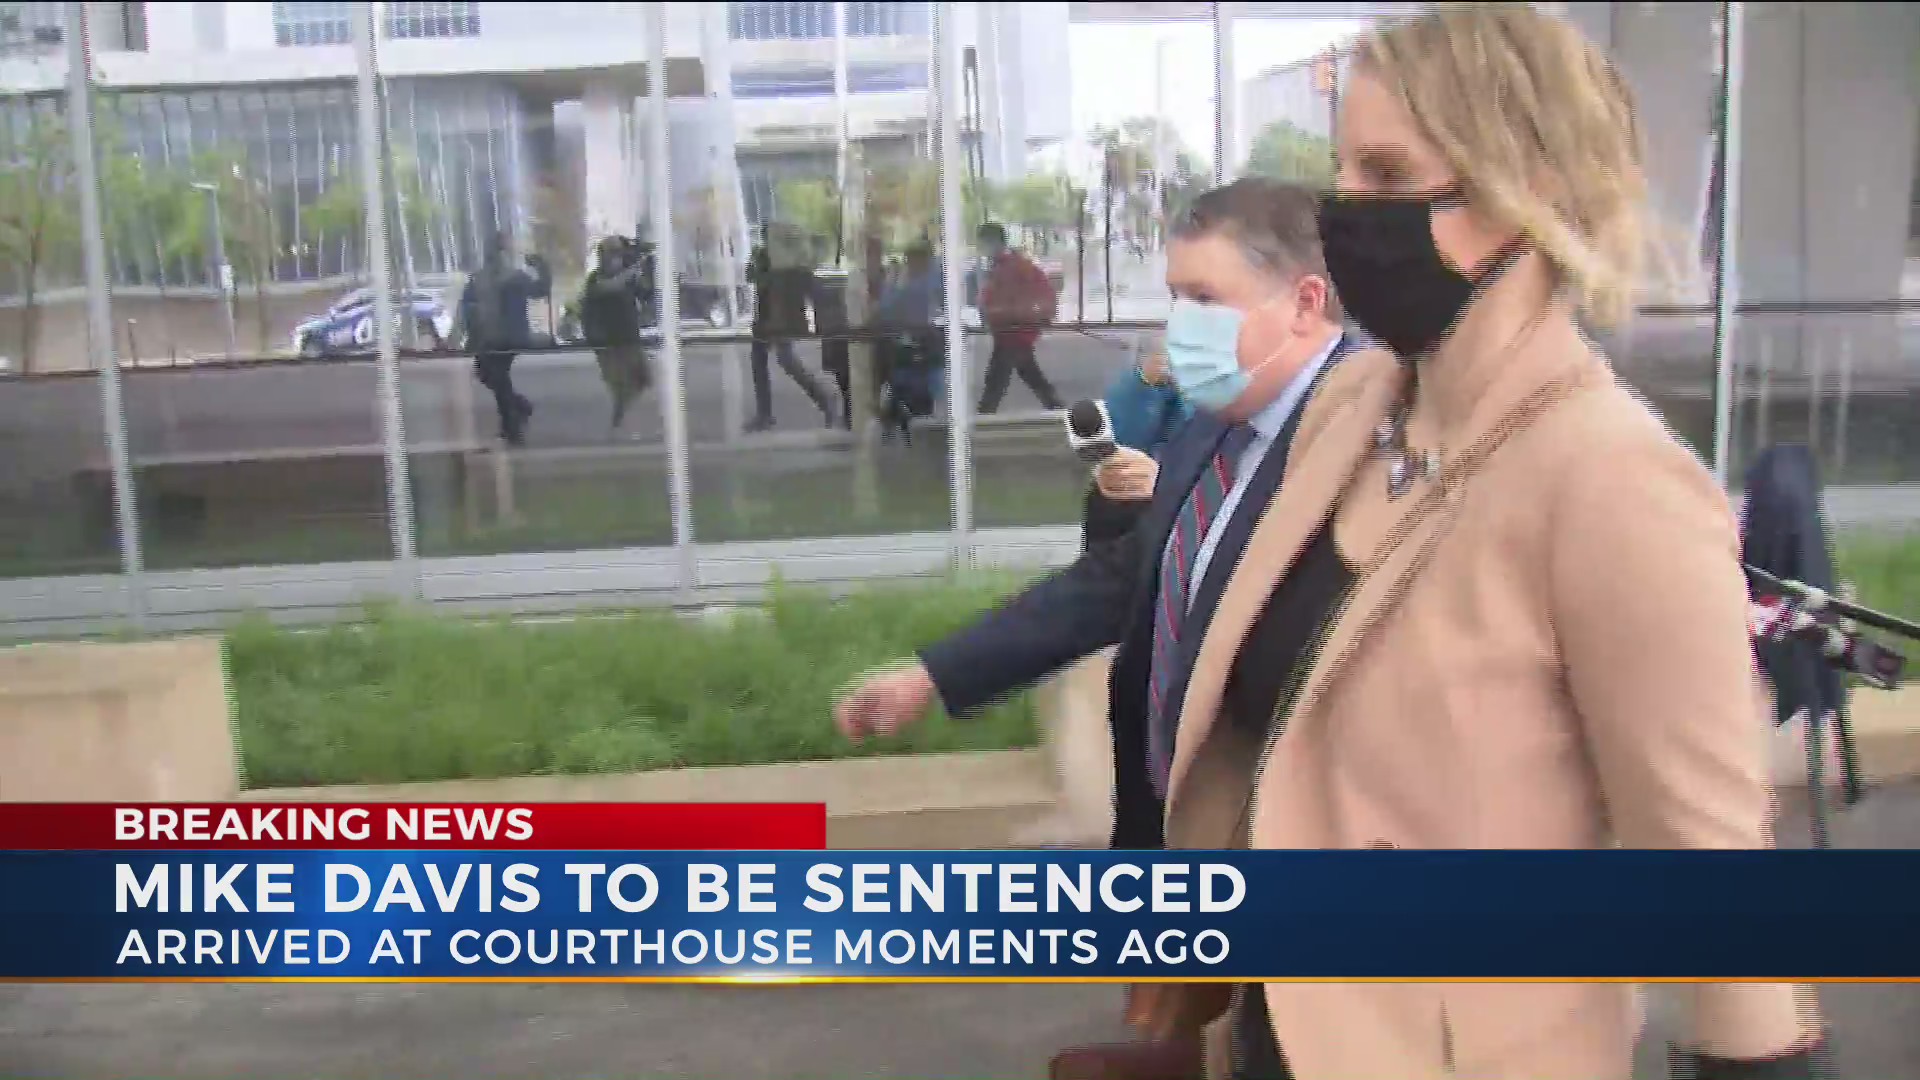 Thumbnail for the video titled "Former 10TV Meteorologist Mike Davis Sentenced NBC4 Midday"